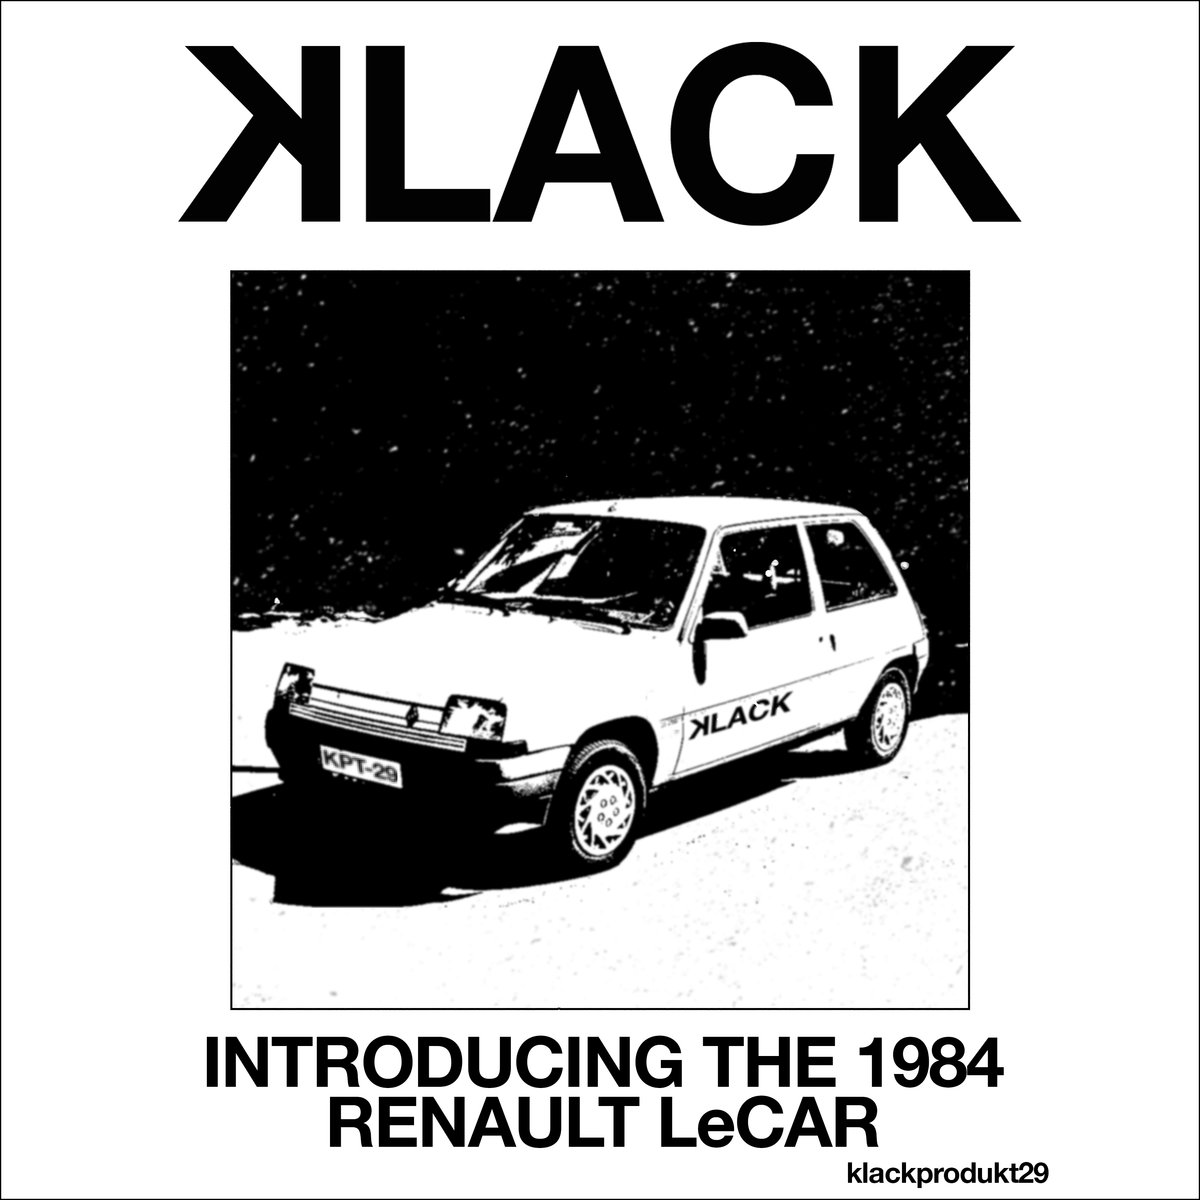 We Have a Commentary: Klack, “Introducing The 1984 Renault LeCar”